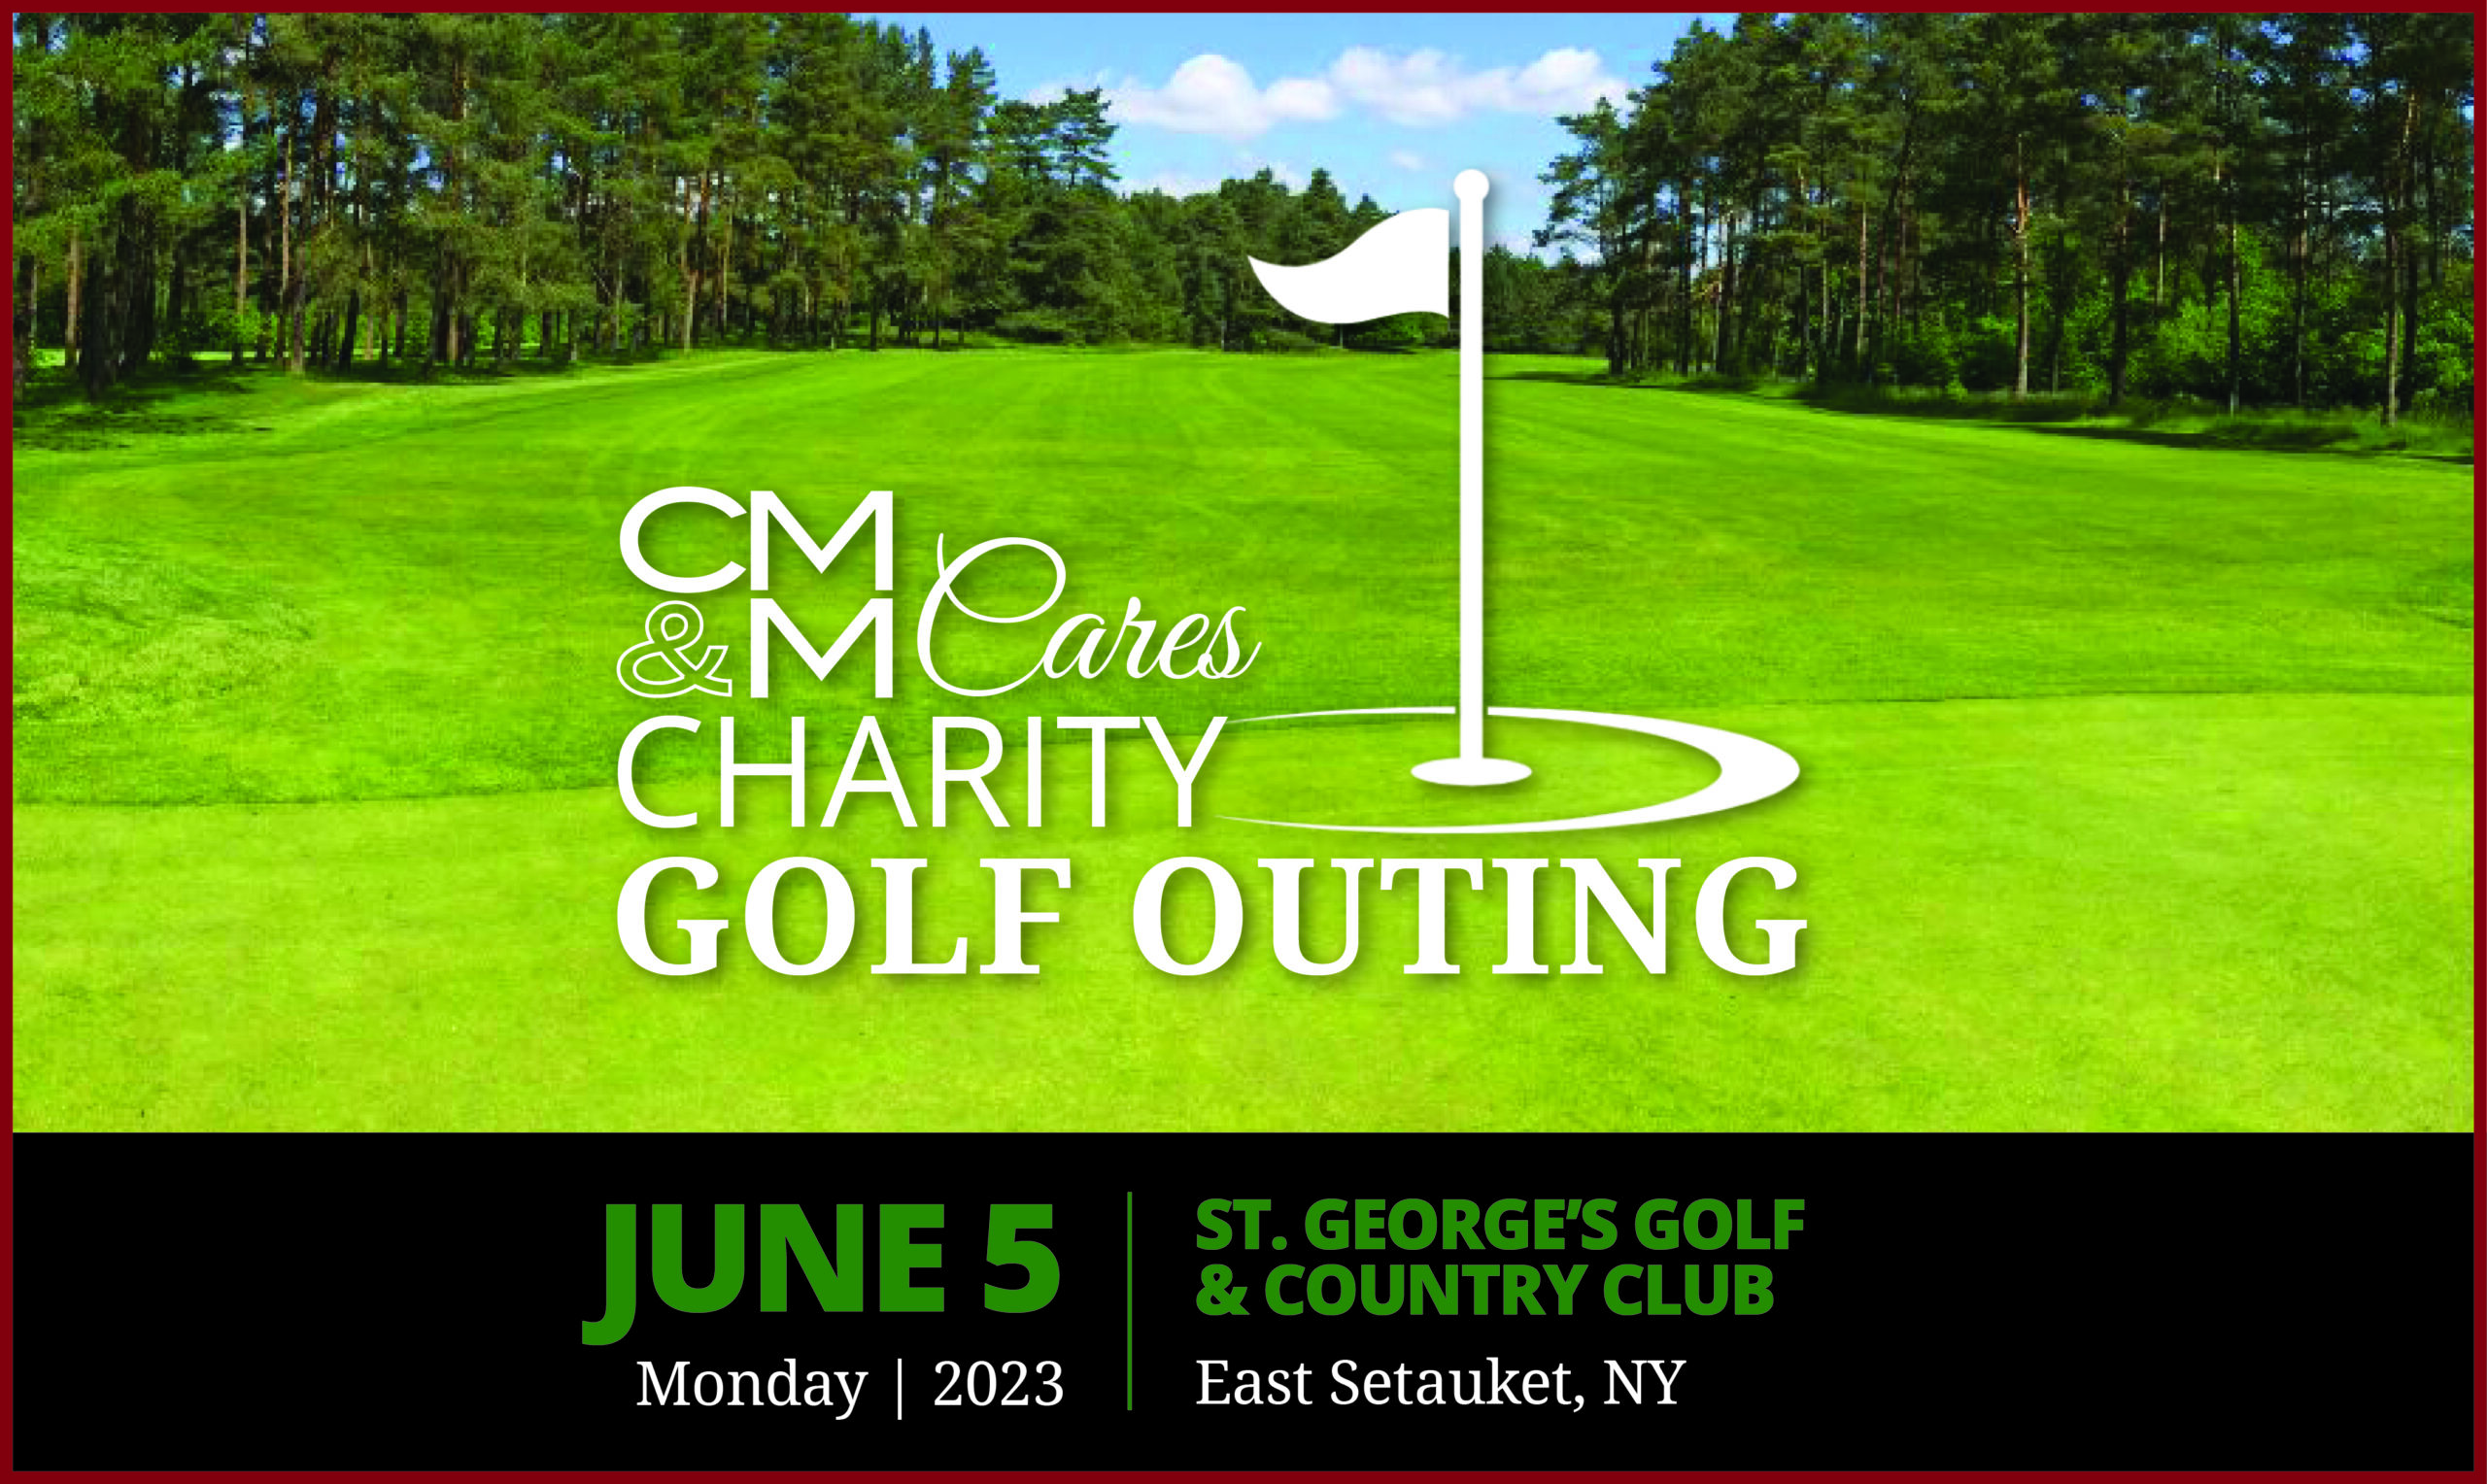 2023 CMM Cares Charity Golf Outing